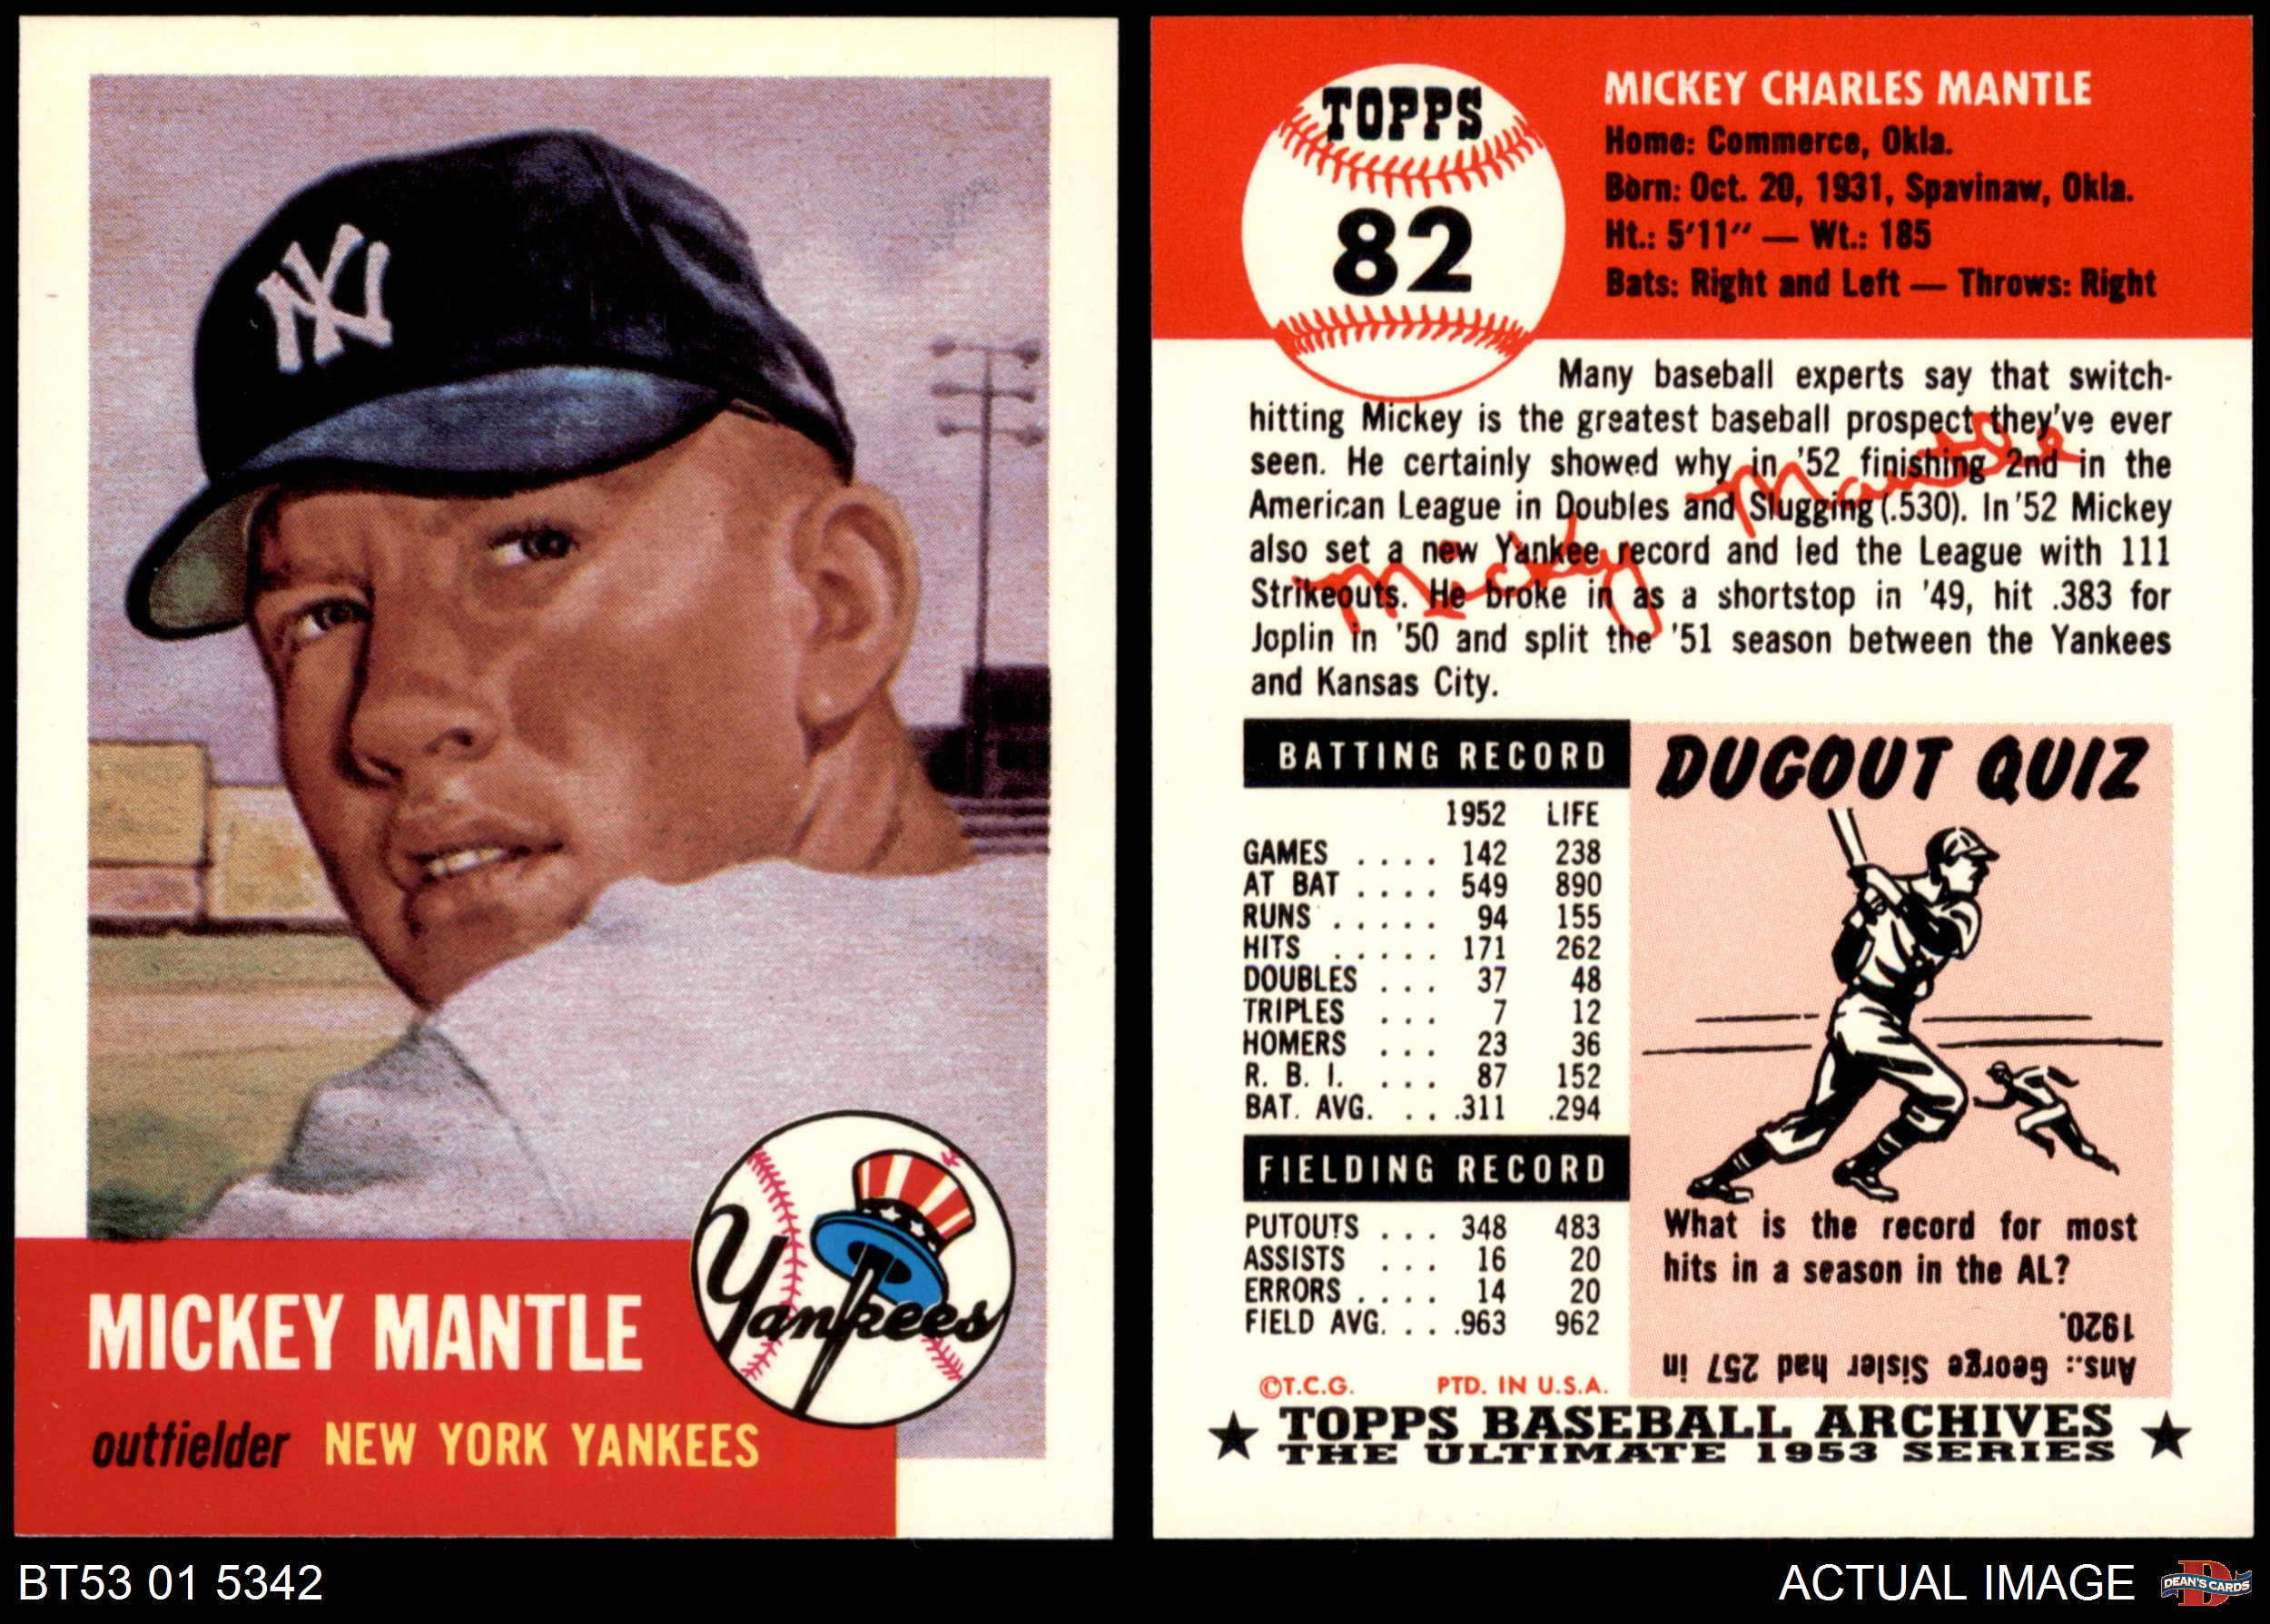 1953 Topps Archives #82 Mickey Mantle New York Yankees 